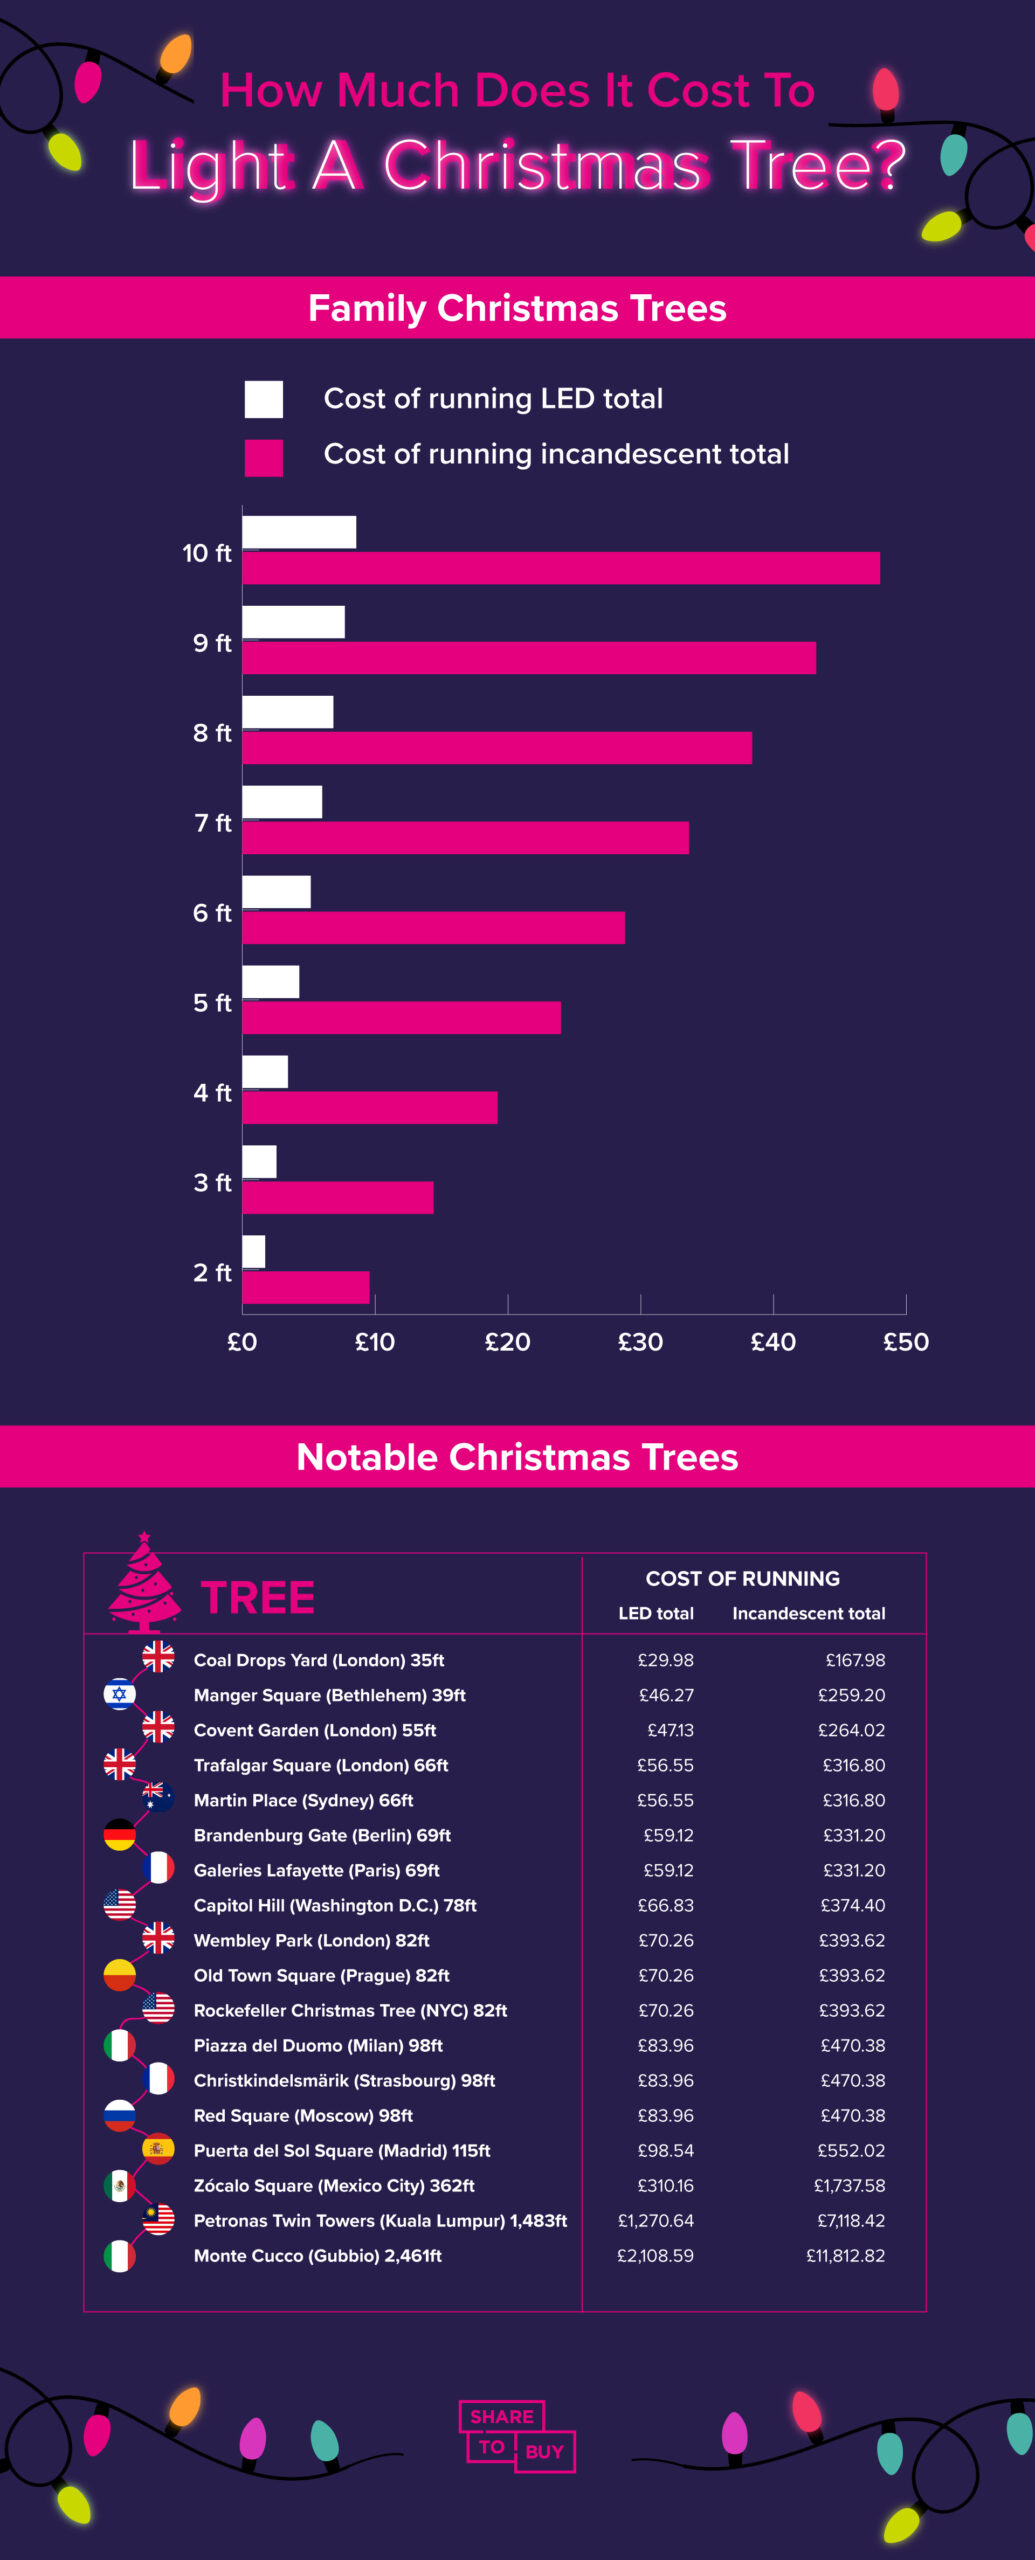 Image showing how much it costs to light different-sized Christmas trees 